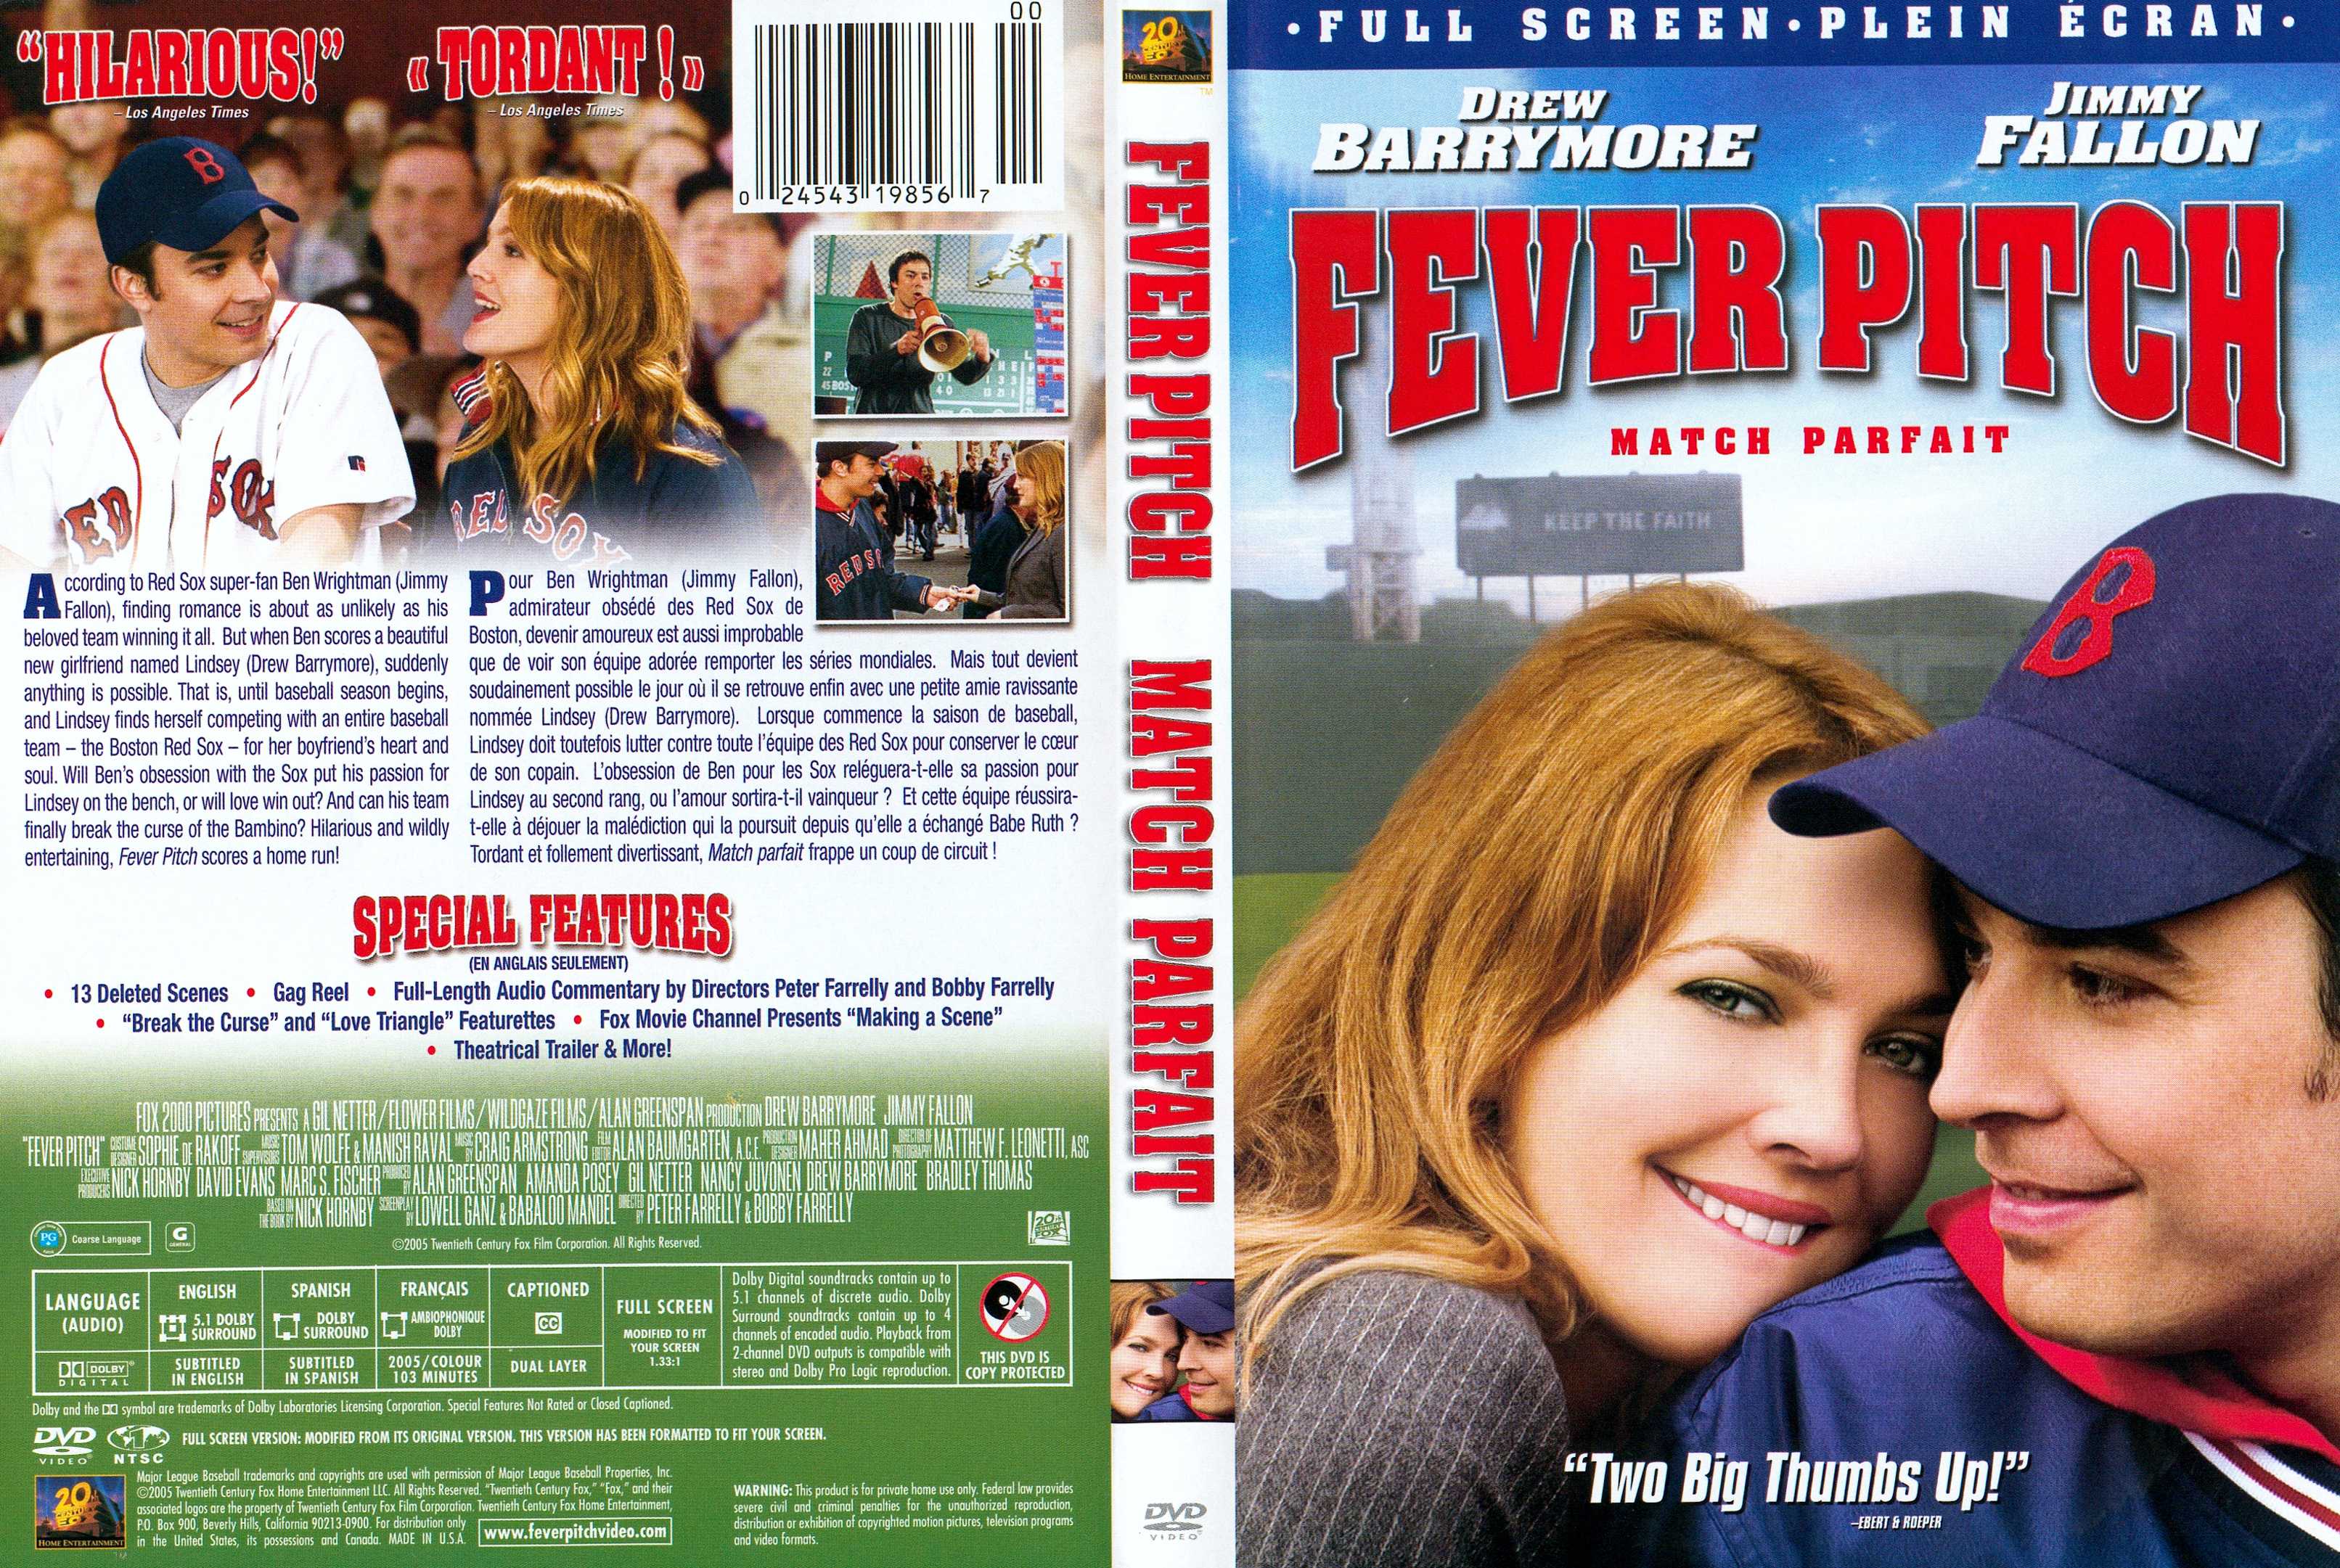 Jaquette DVD Fever pitch